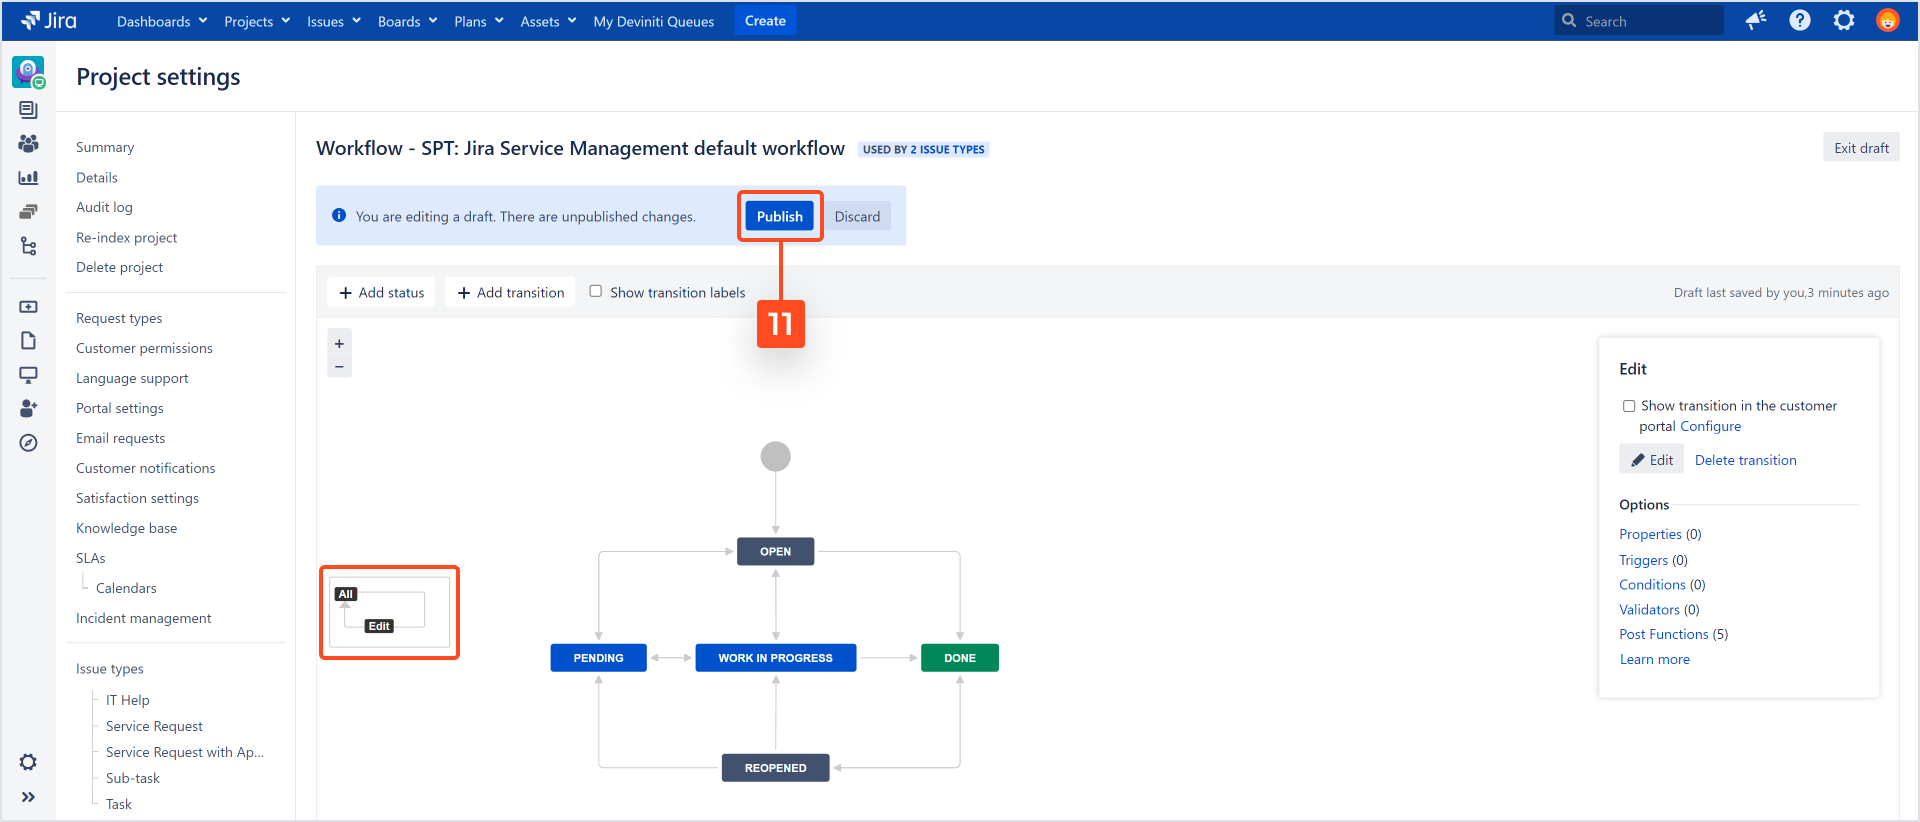 Creating Jira Service Management self service experience